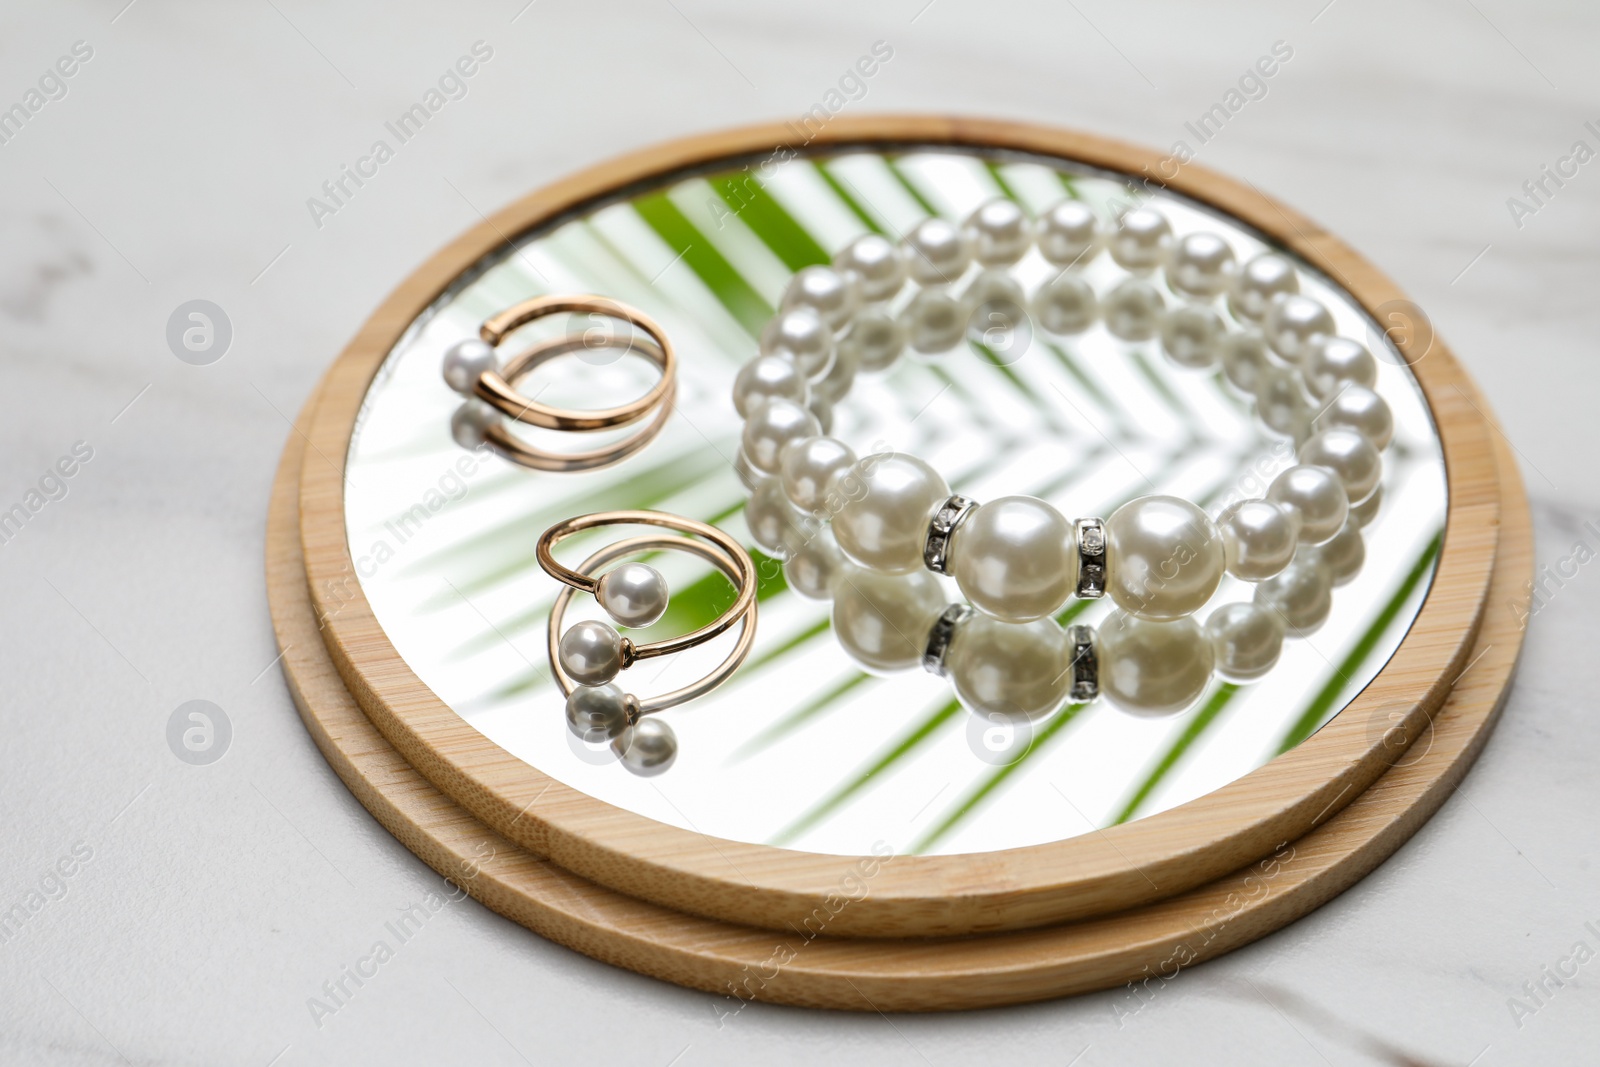 Photo of Elegant bracelet and earrings with pearls on white marble table